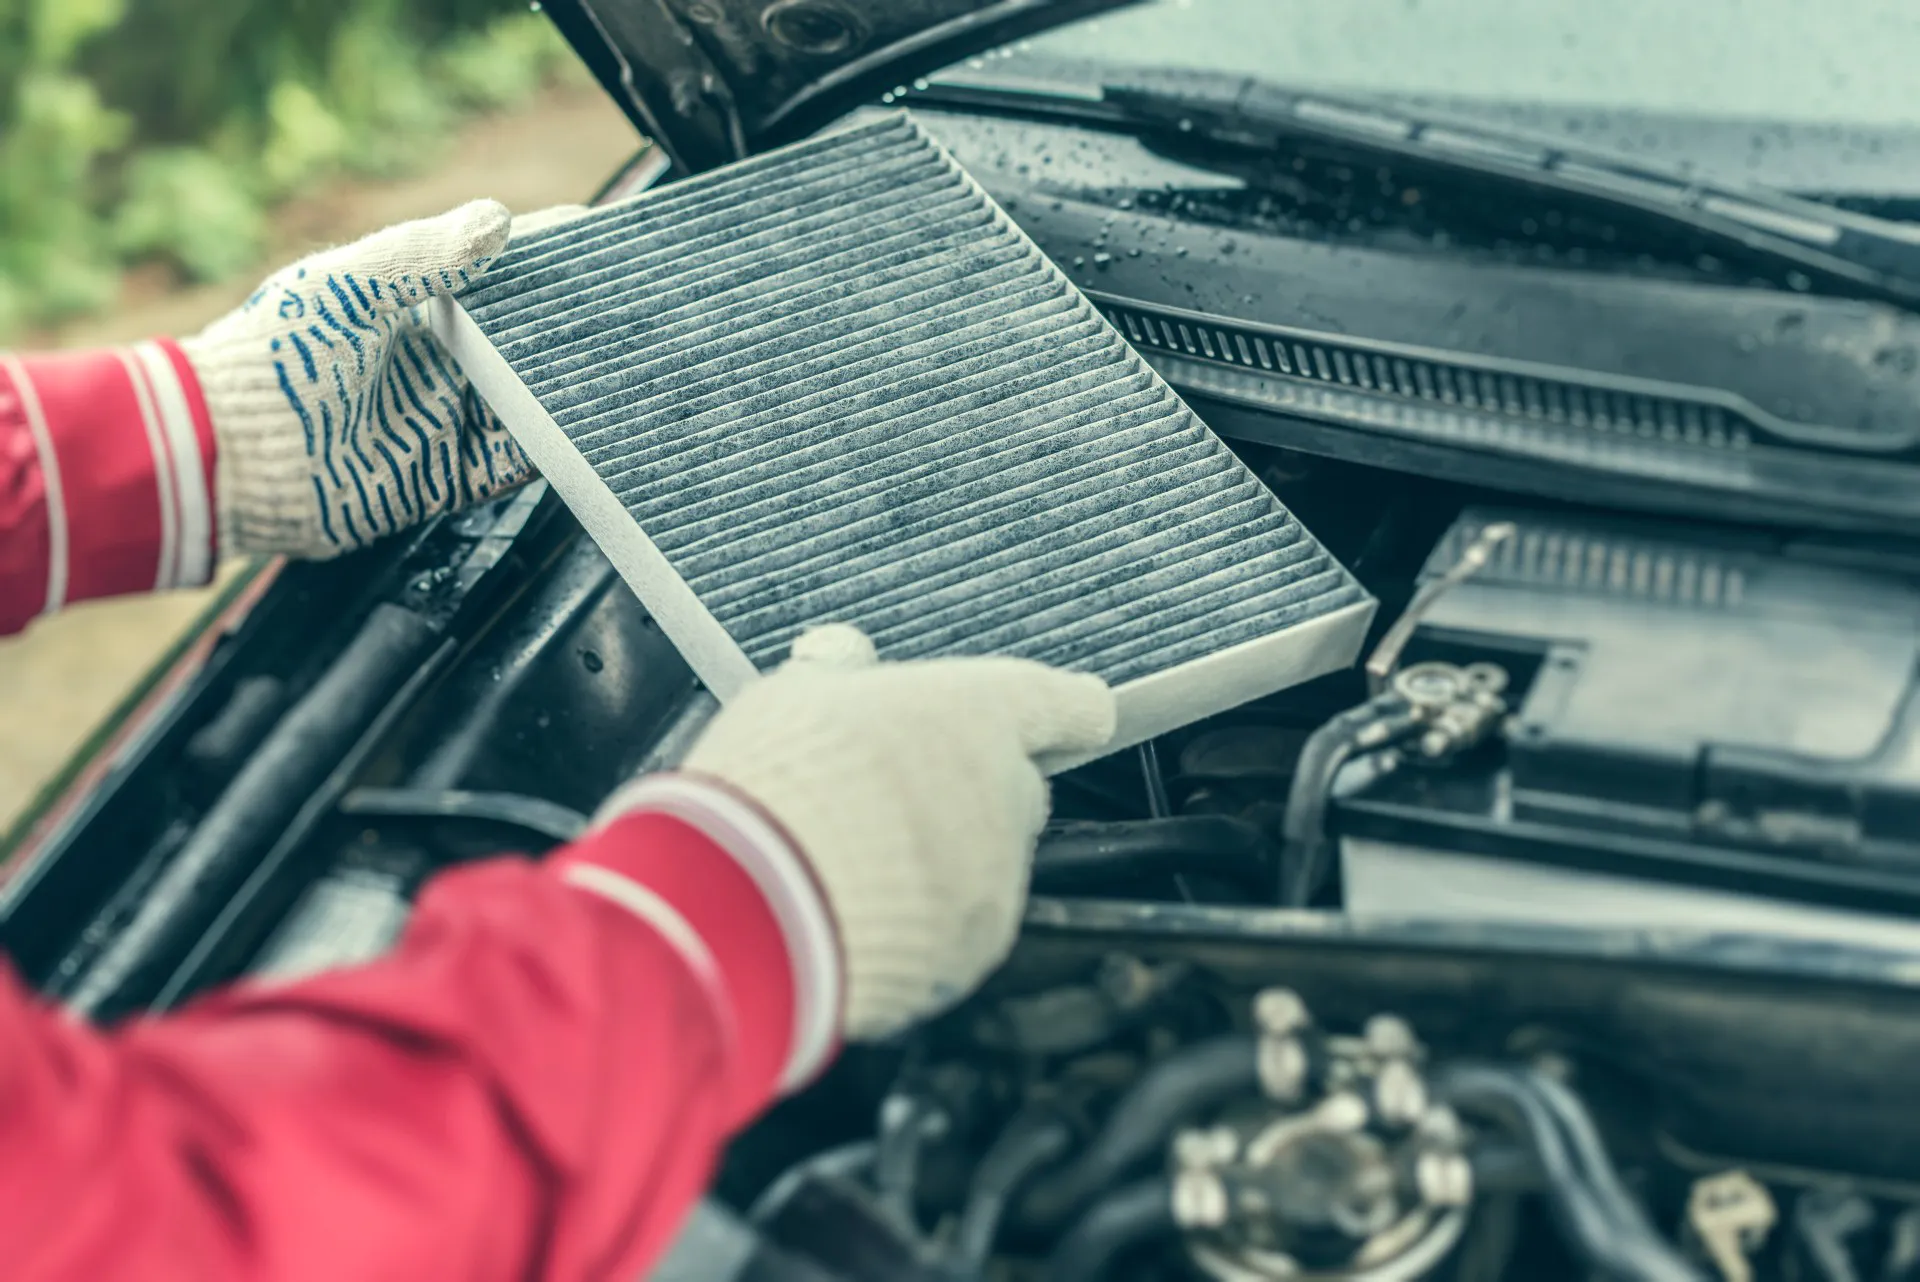 The auto mechanic replaces the car's interior filter.